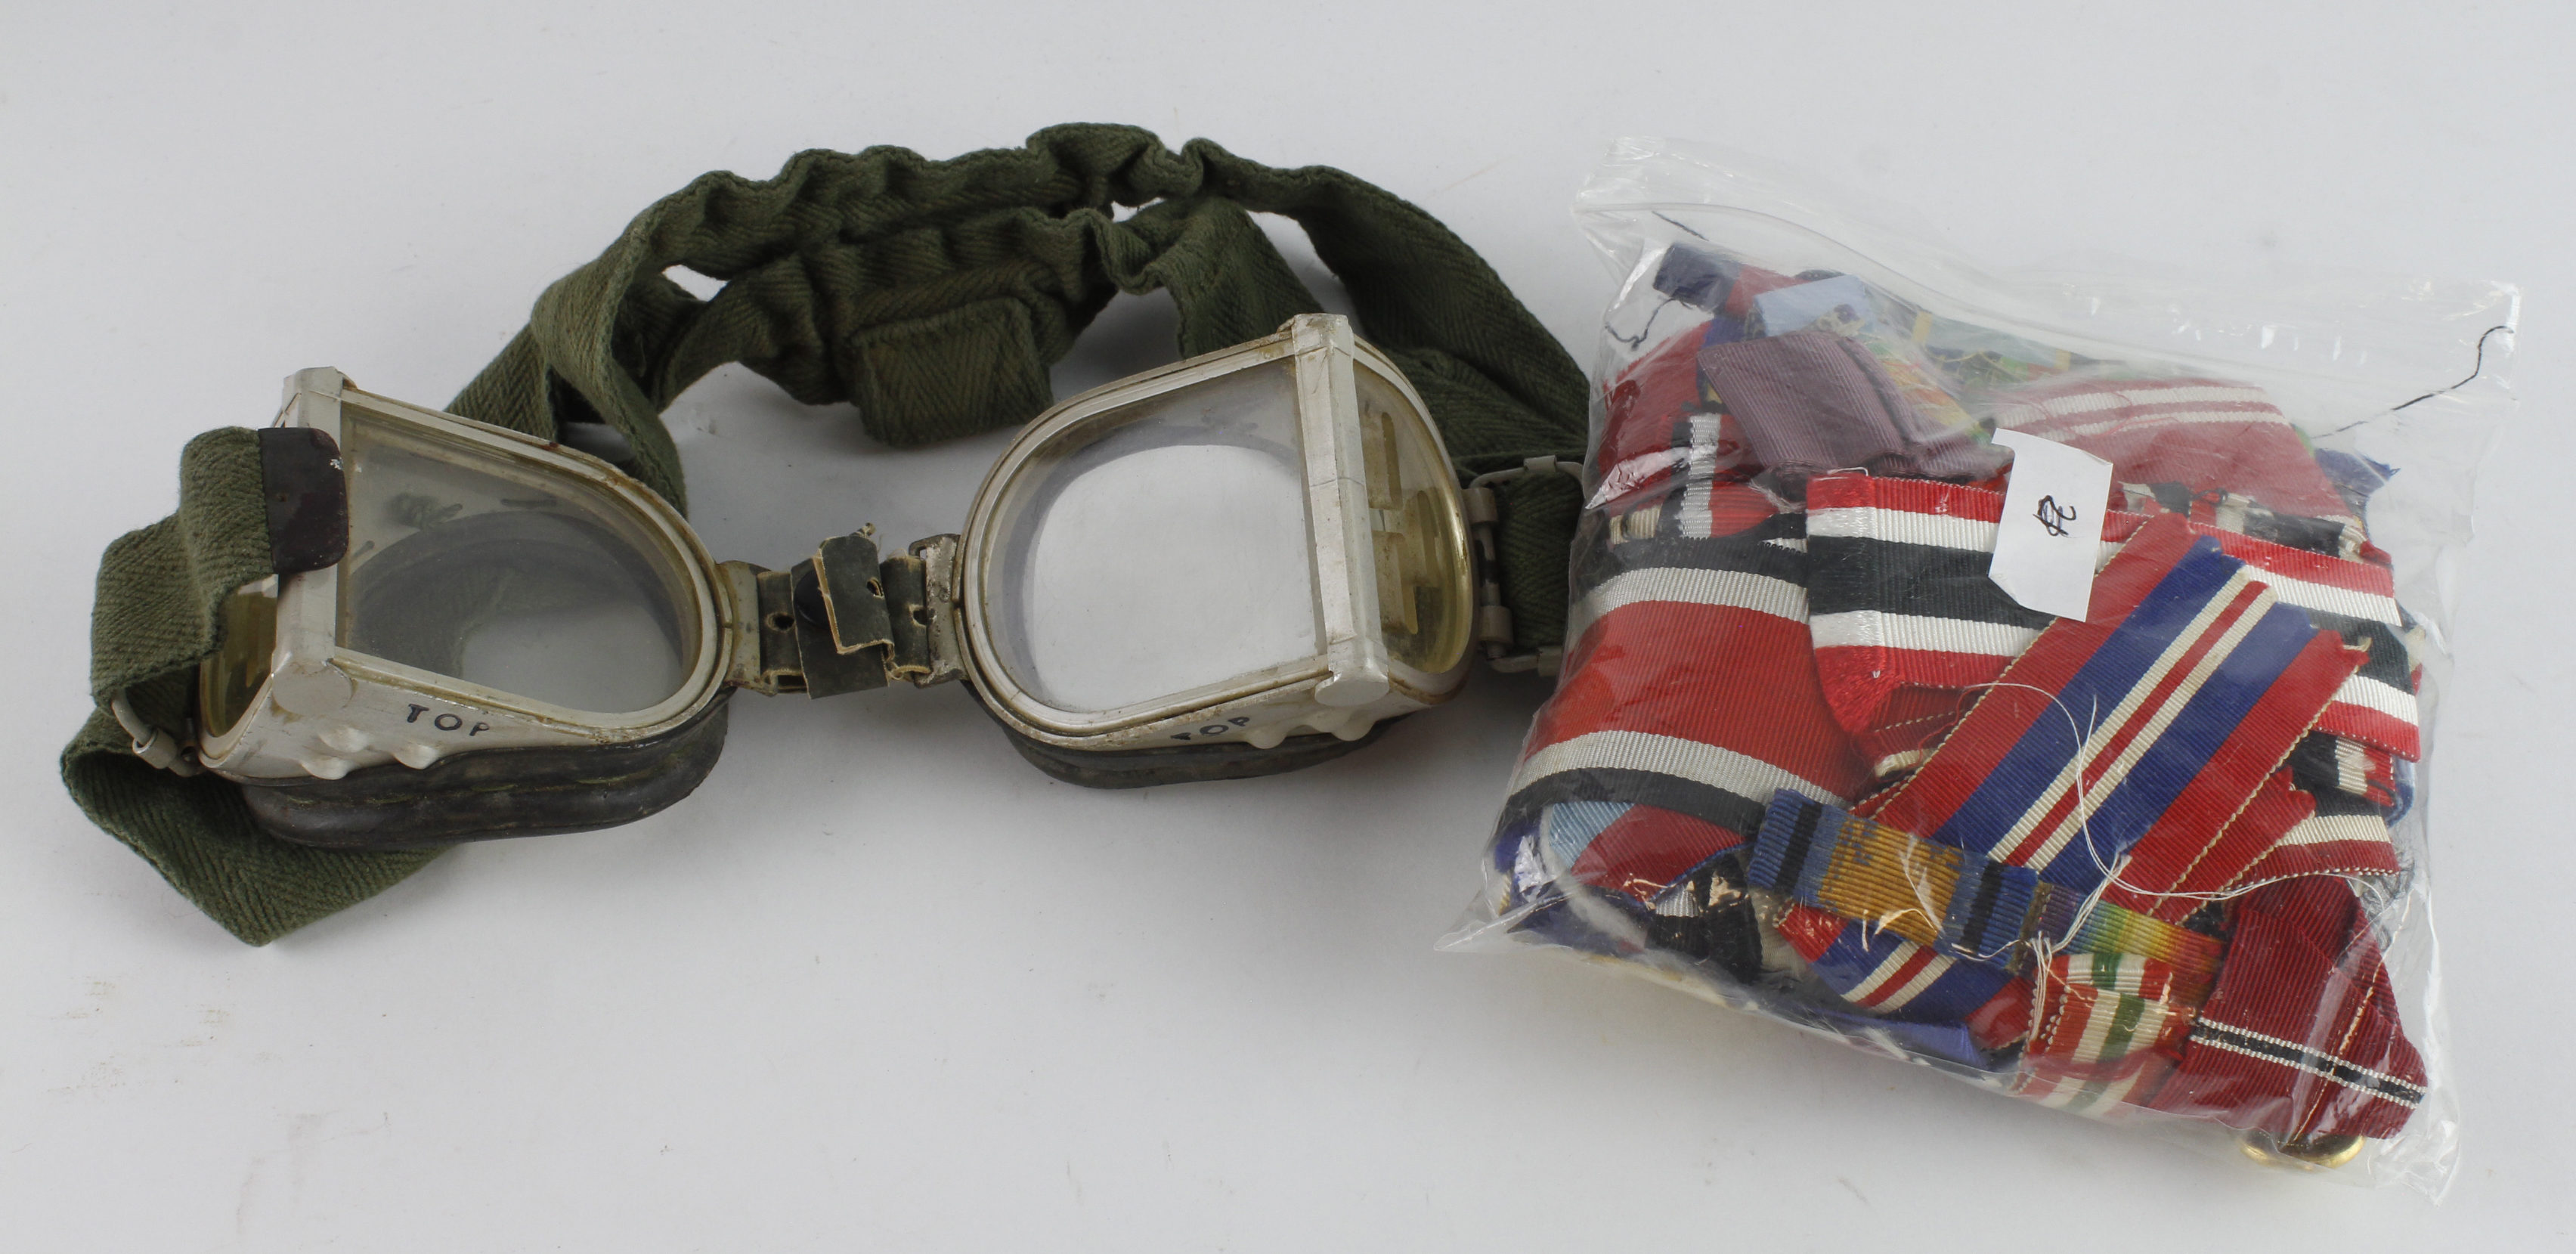 Bag of various medal ribbons and a pair of military (?) goggles